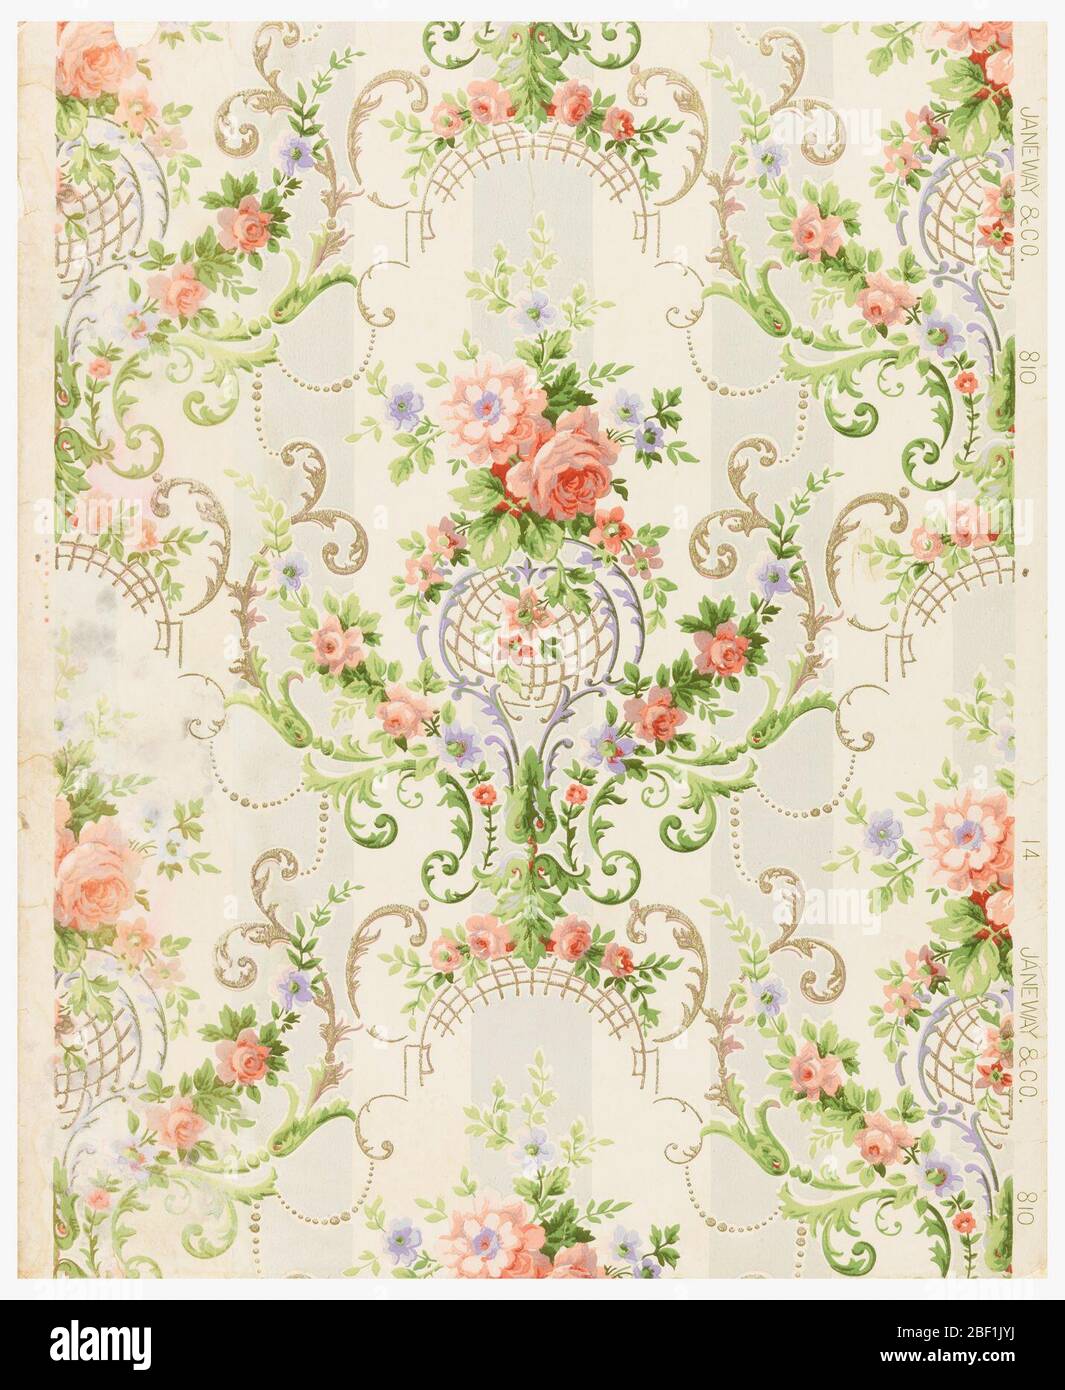 Sidewall. Modified rococo design of green and gold scrolls, sprays of roses are festooned over scrolls. The background is composed of two wide stripes, one gray and the other ivory. Printed on margin: '14, Janeway & Co., 810'. Stock Photo